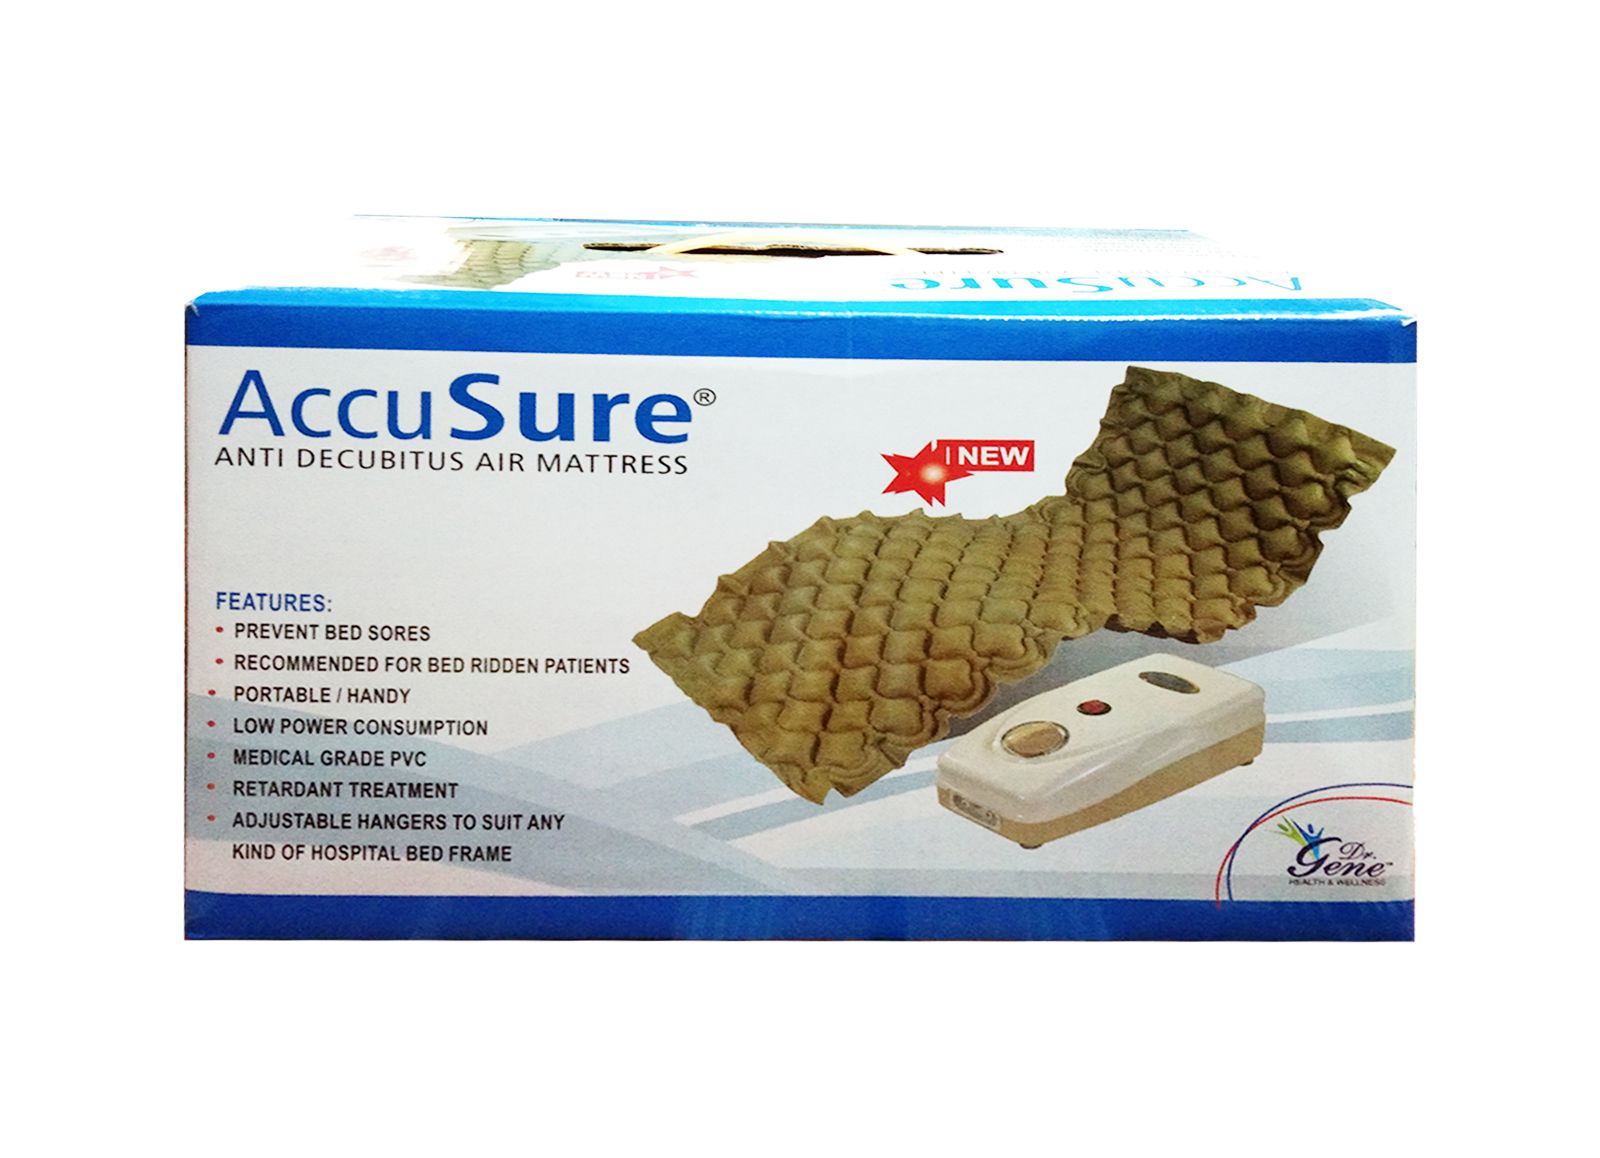 Accusure AIR MATTRESS WITH PUMP FOR PREVENTING BED SORES 8 89 cm